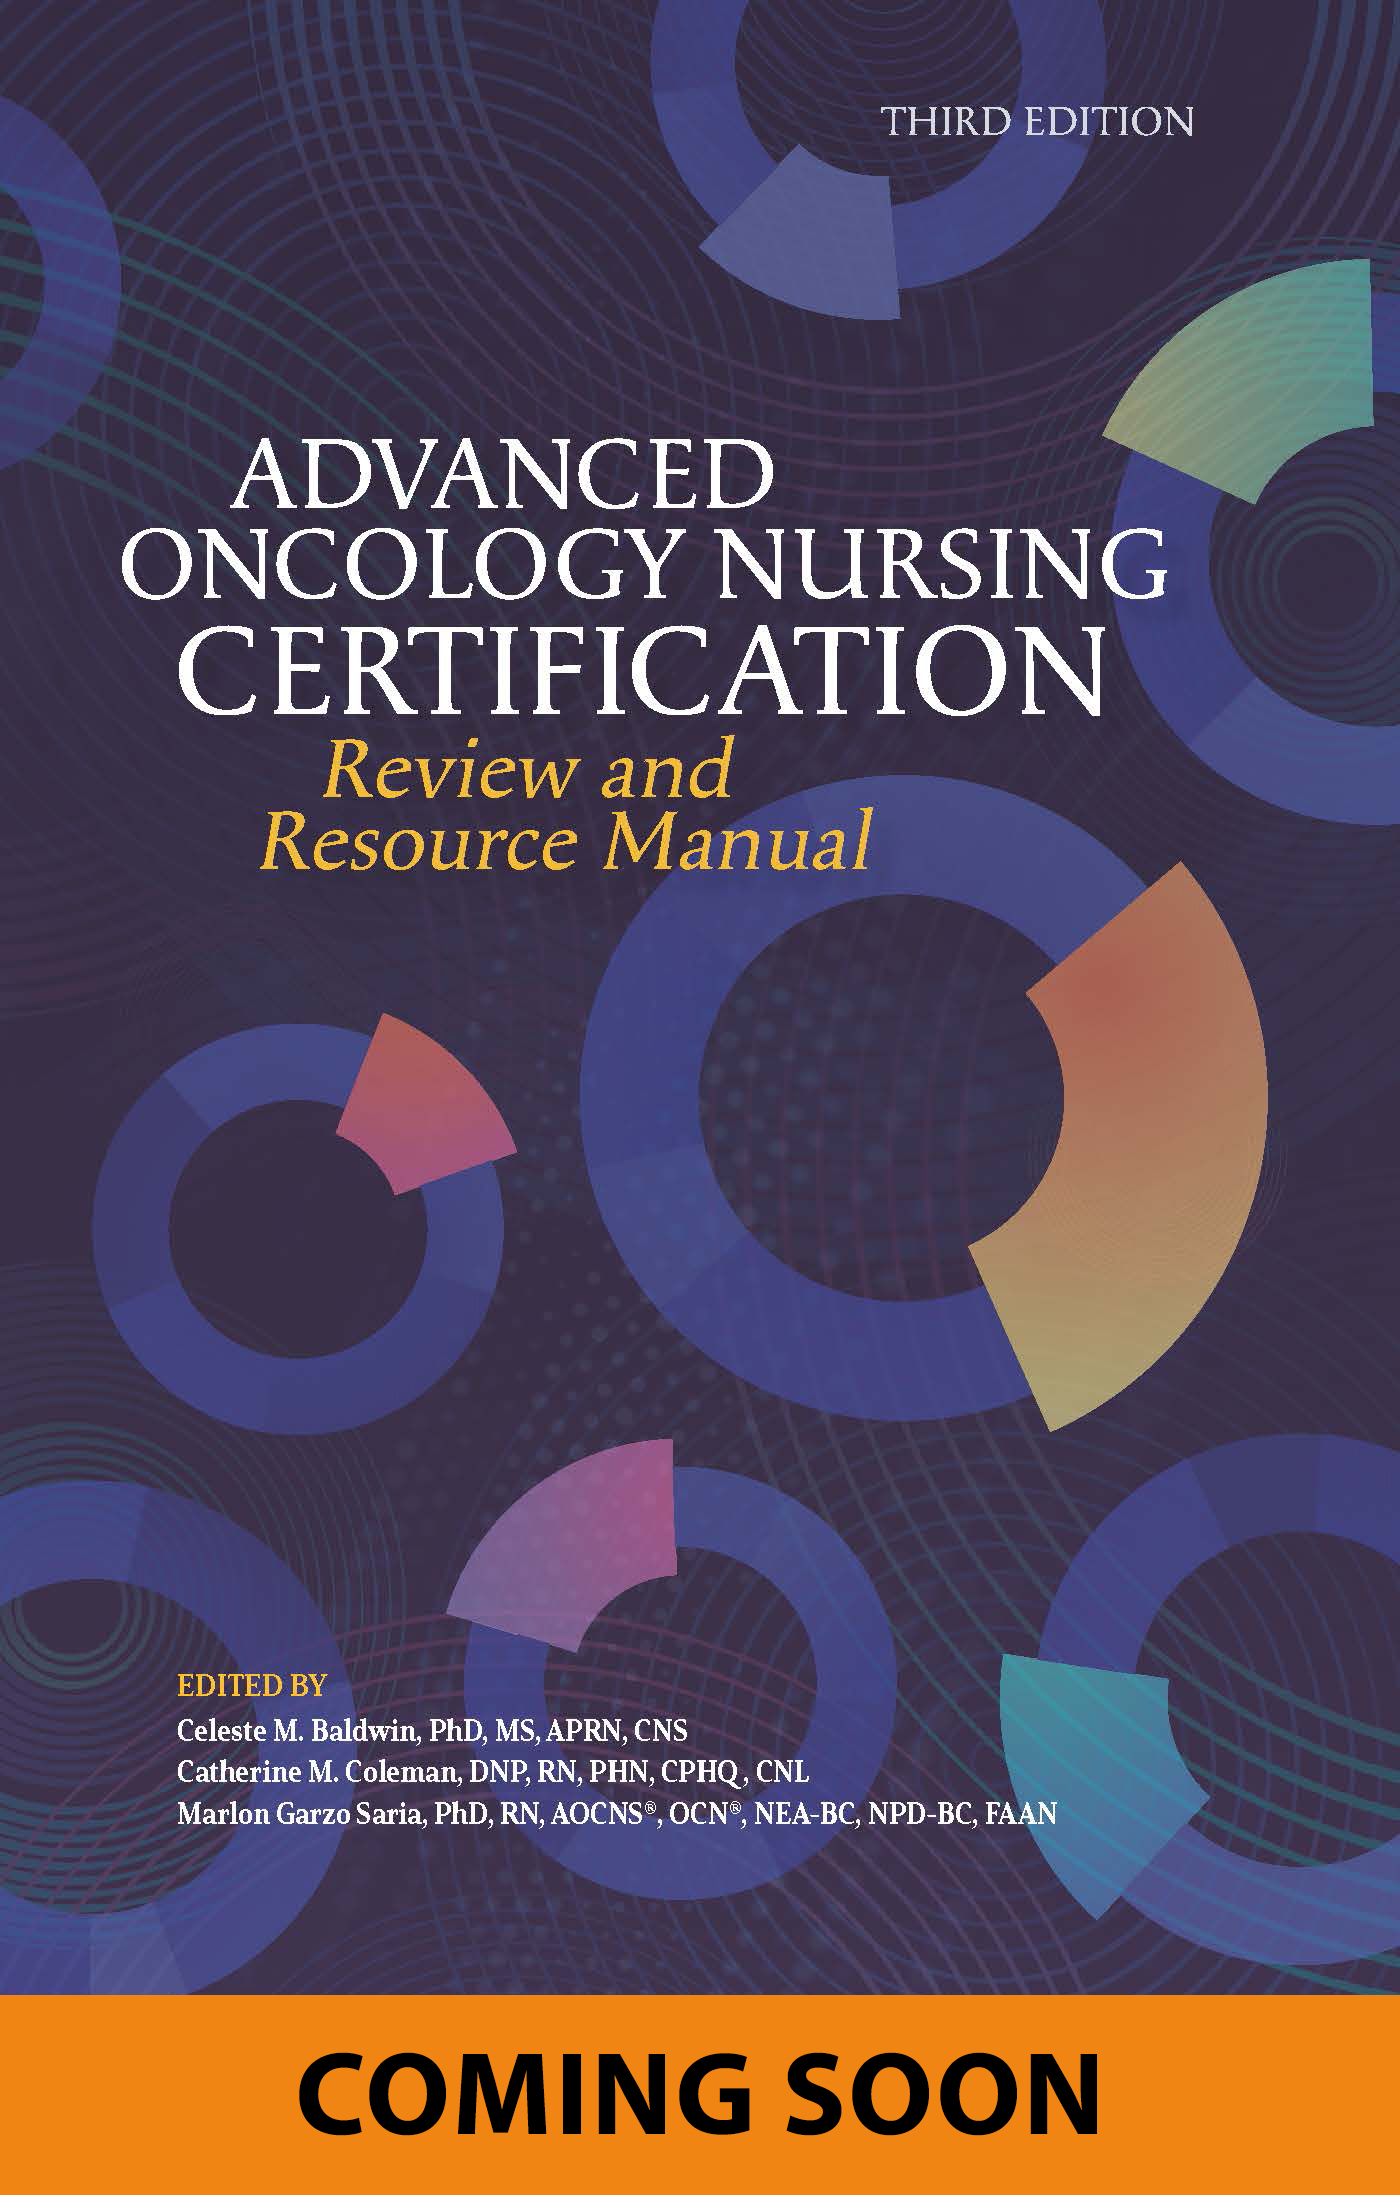 Advanced Oncology Nursing Certification Review and Resource Manual, third edition